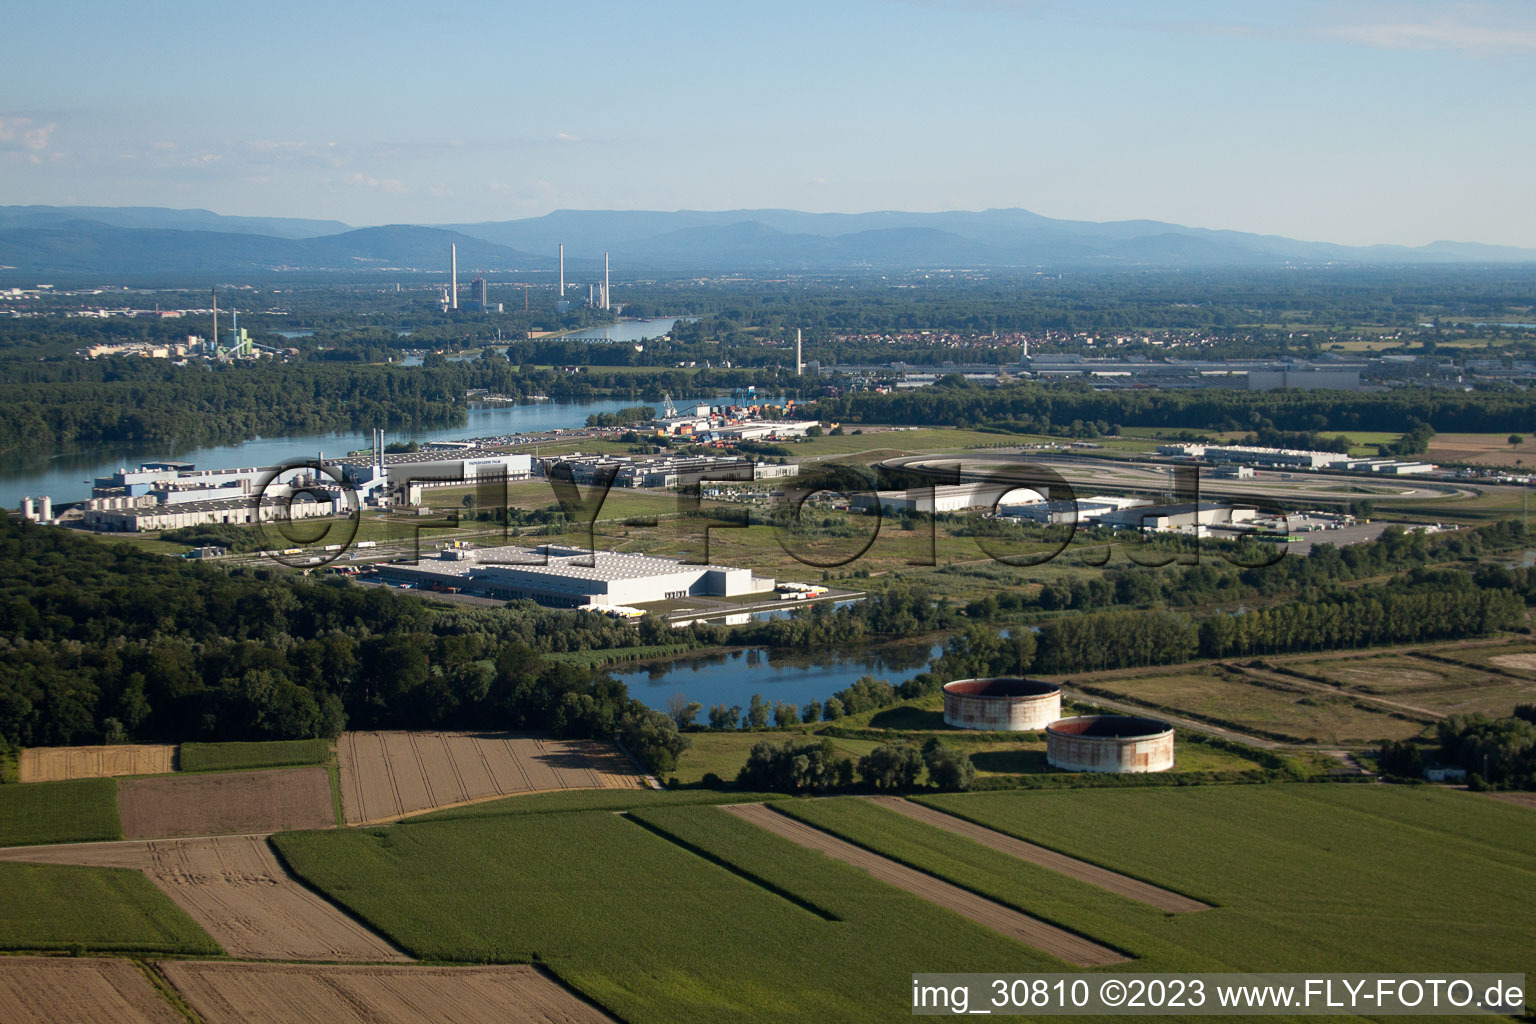 Oberwald industrial area in Wörth am Rhein in the state Rhineland-Palatinate, Germany viewn from the air